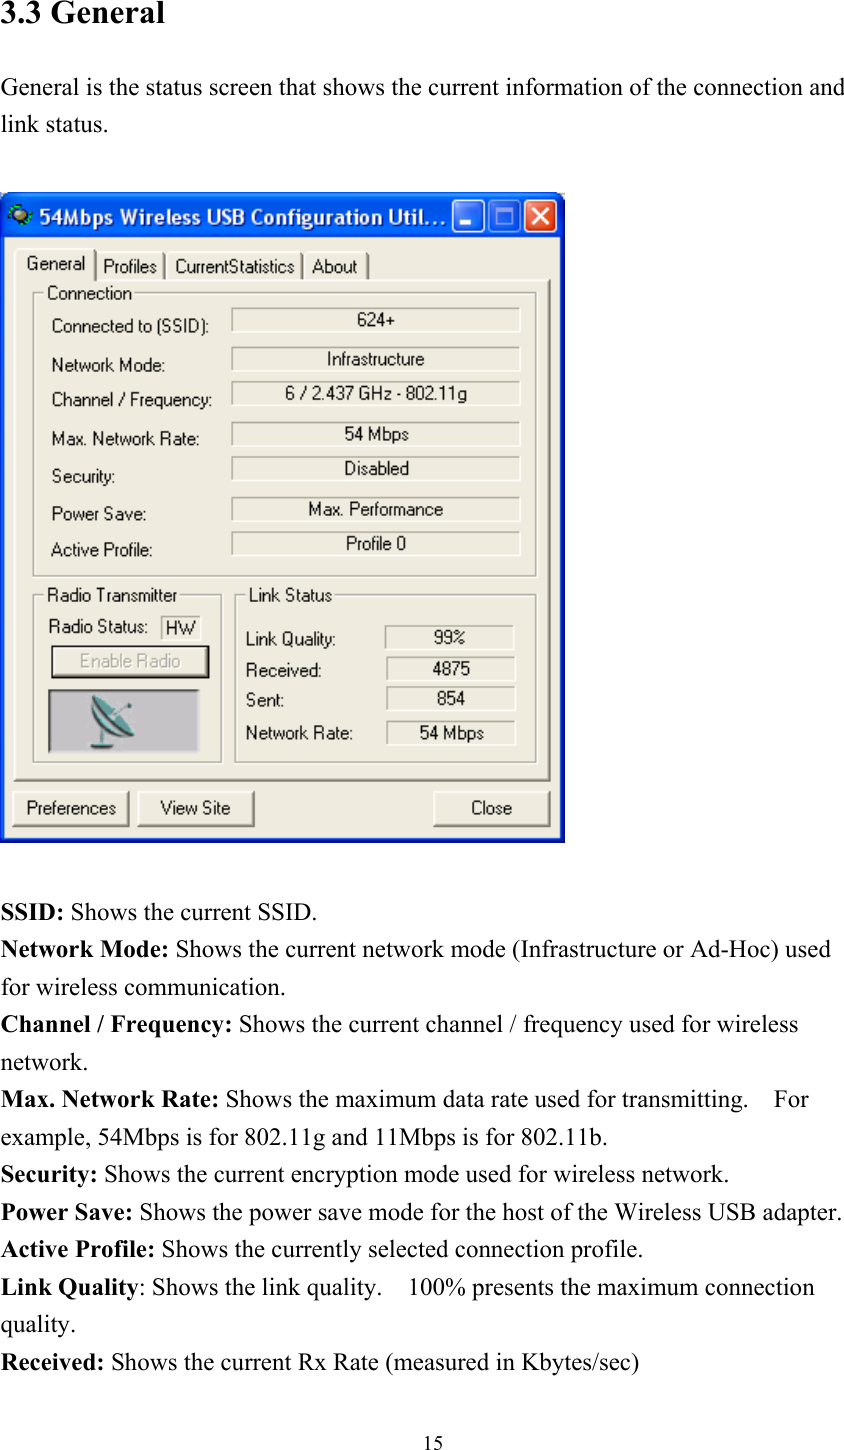 3.3 General   General is the status screen that shows the current information of the connection and link status.    SSID: Shows the current SSID. Network Mode: Shows the current network mode (Infrastructure or Ad-Hoc) used for wireless communication. Channel / Frequency: Shows the current channel / frequency used for wireless network. Max. Network Rate: Shows the maximum data rate used for transmitting.    For example, 54Mbps is for 802.11g and 11Mbps is for 802.11b. Security: Shows the current encryption mode used for wireless network. Power Save: Shows the power save mode for the host of the Wireless USB adapter. Active Profile: Shows the currently selected connection profile. Link Quality: Shows the link quality.    100% presents the maximum connection quality. Received: Shows the current Rx Rate (measured in Kbytes/sec)  15